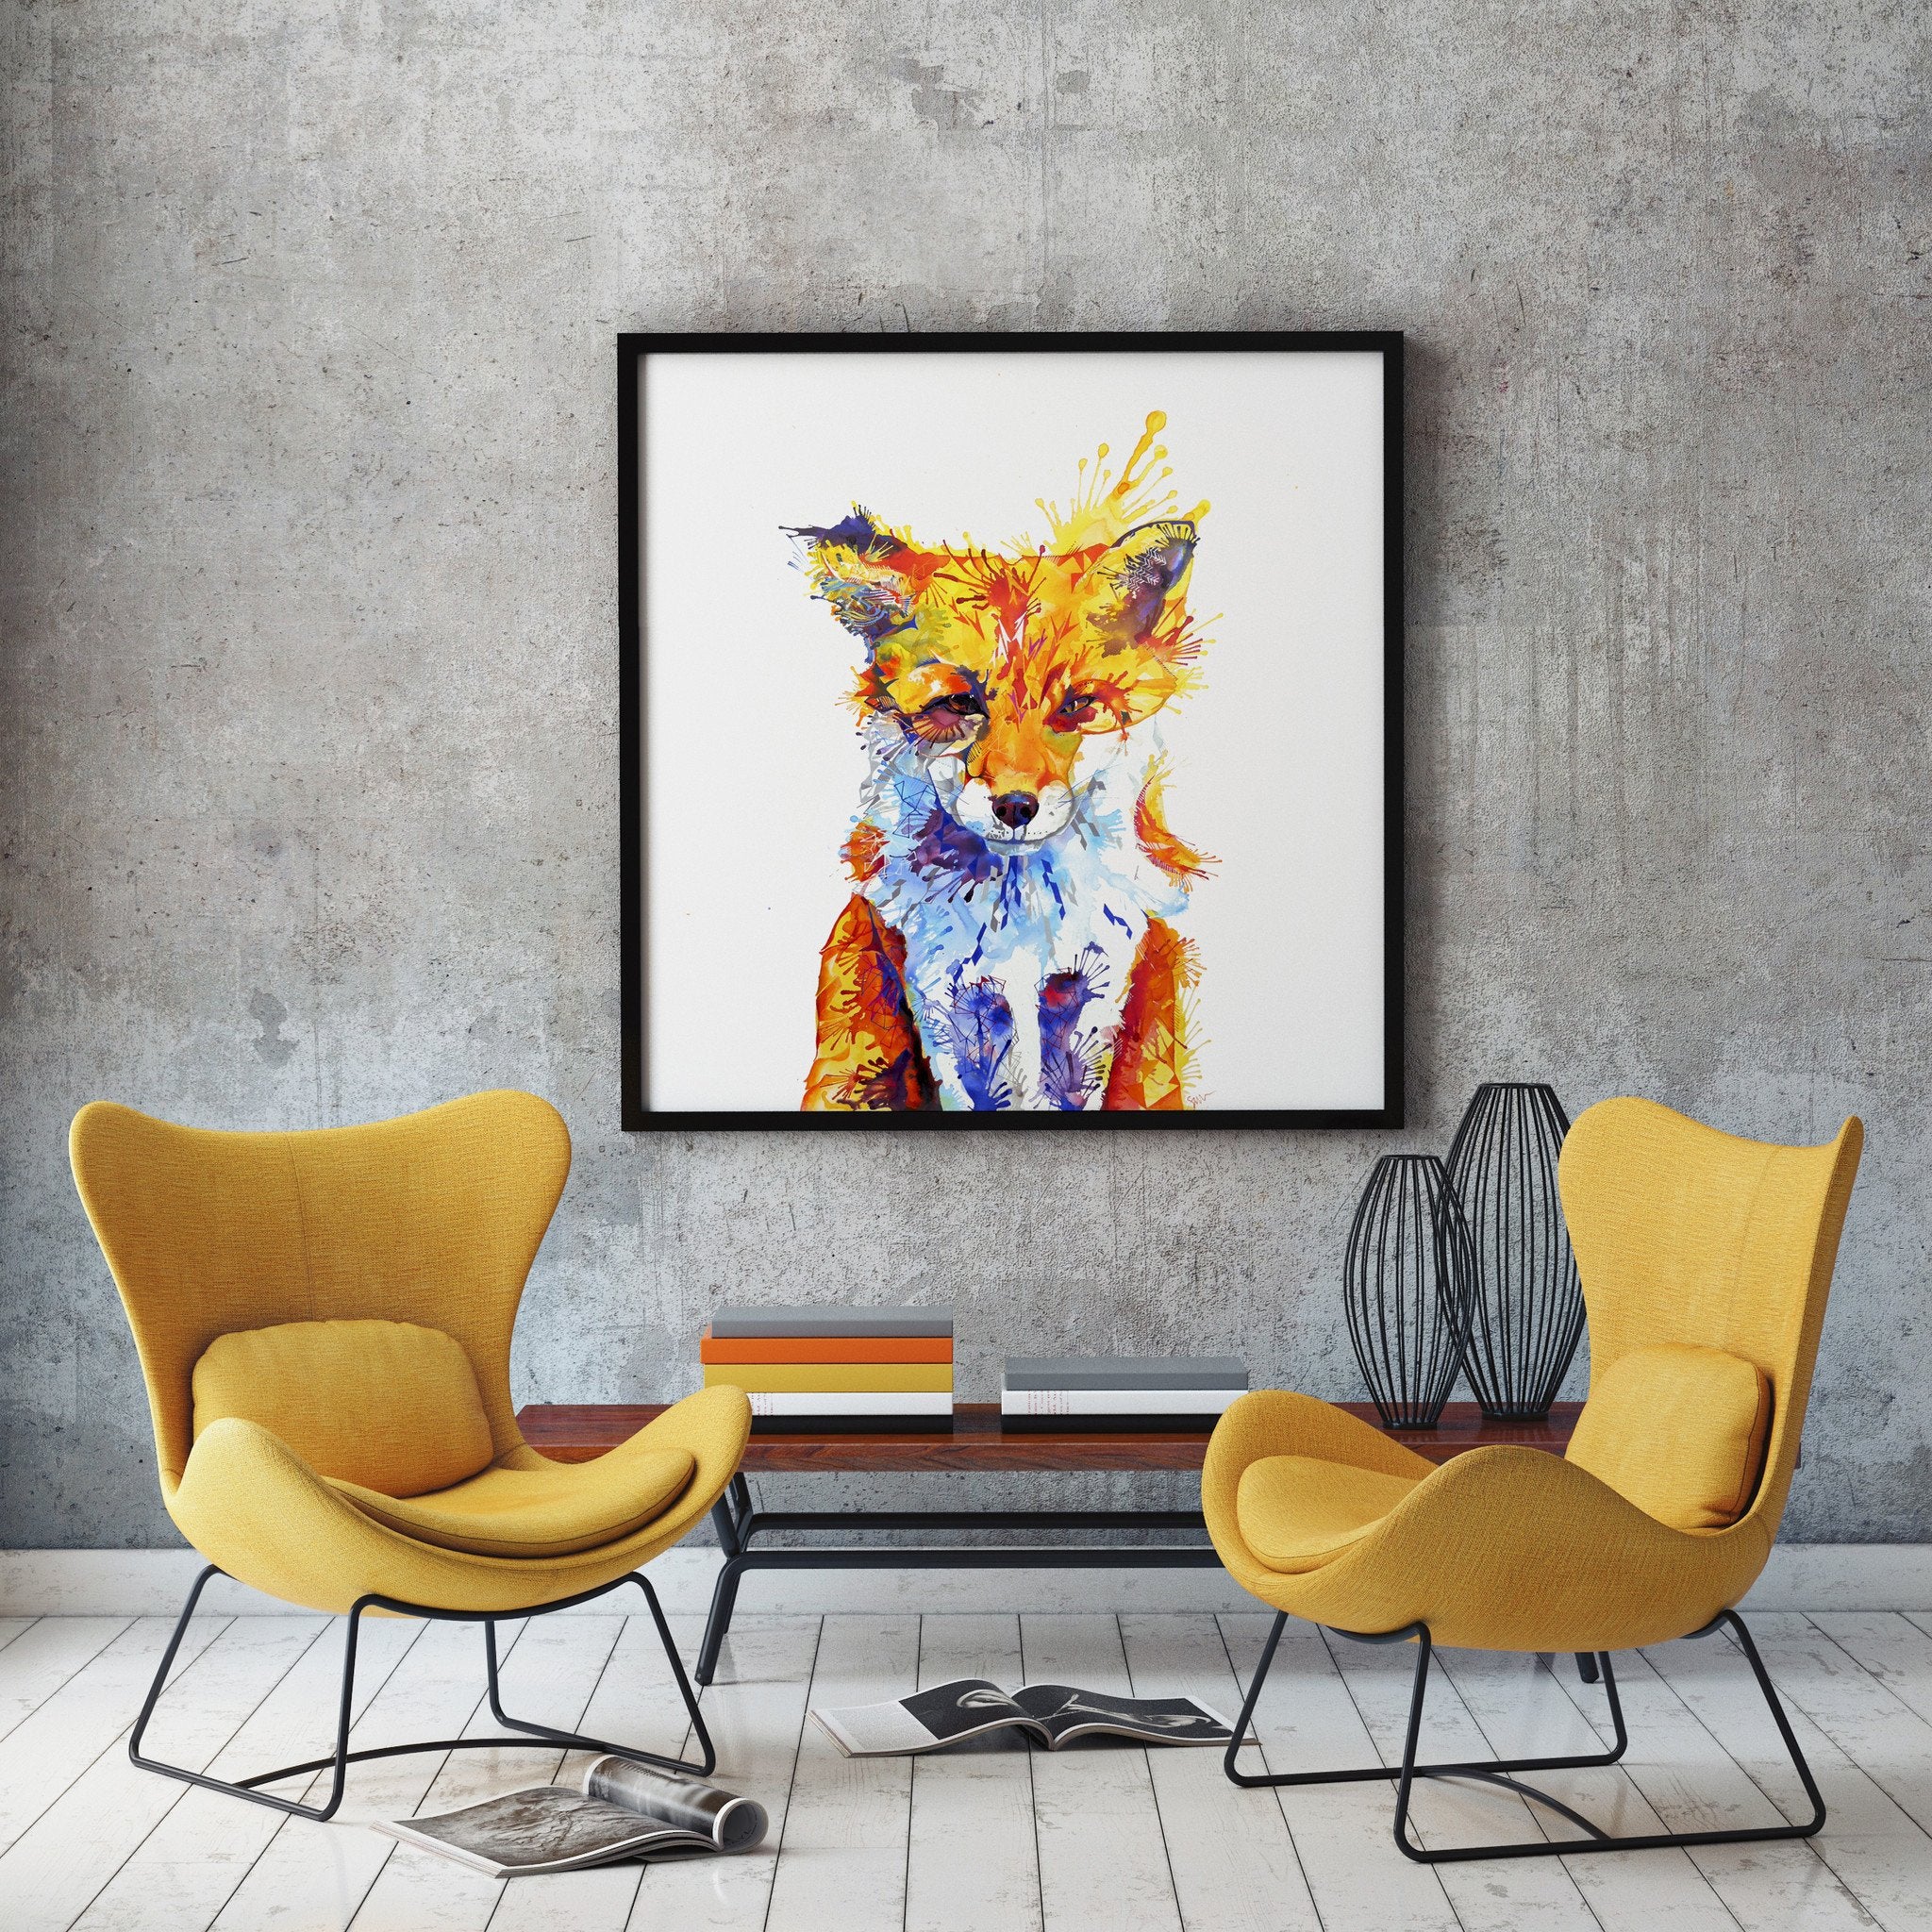 Wildlife art prints plus original paintings with a wide selection